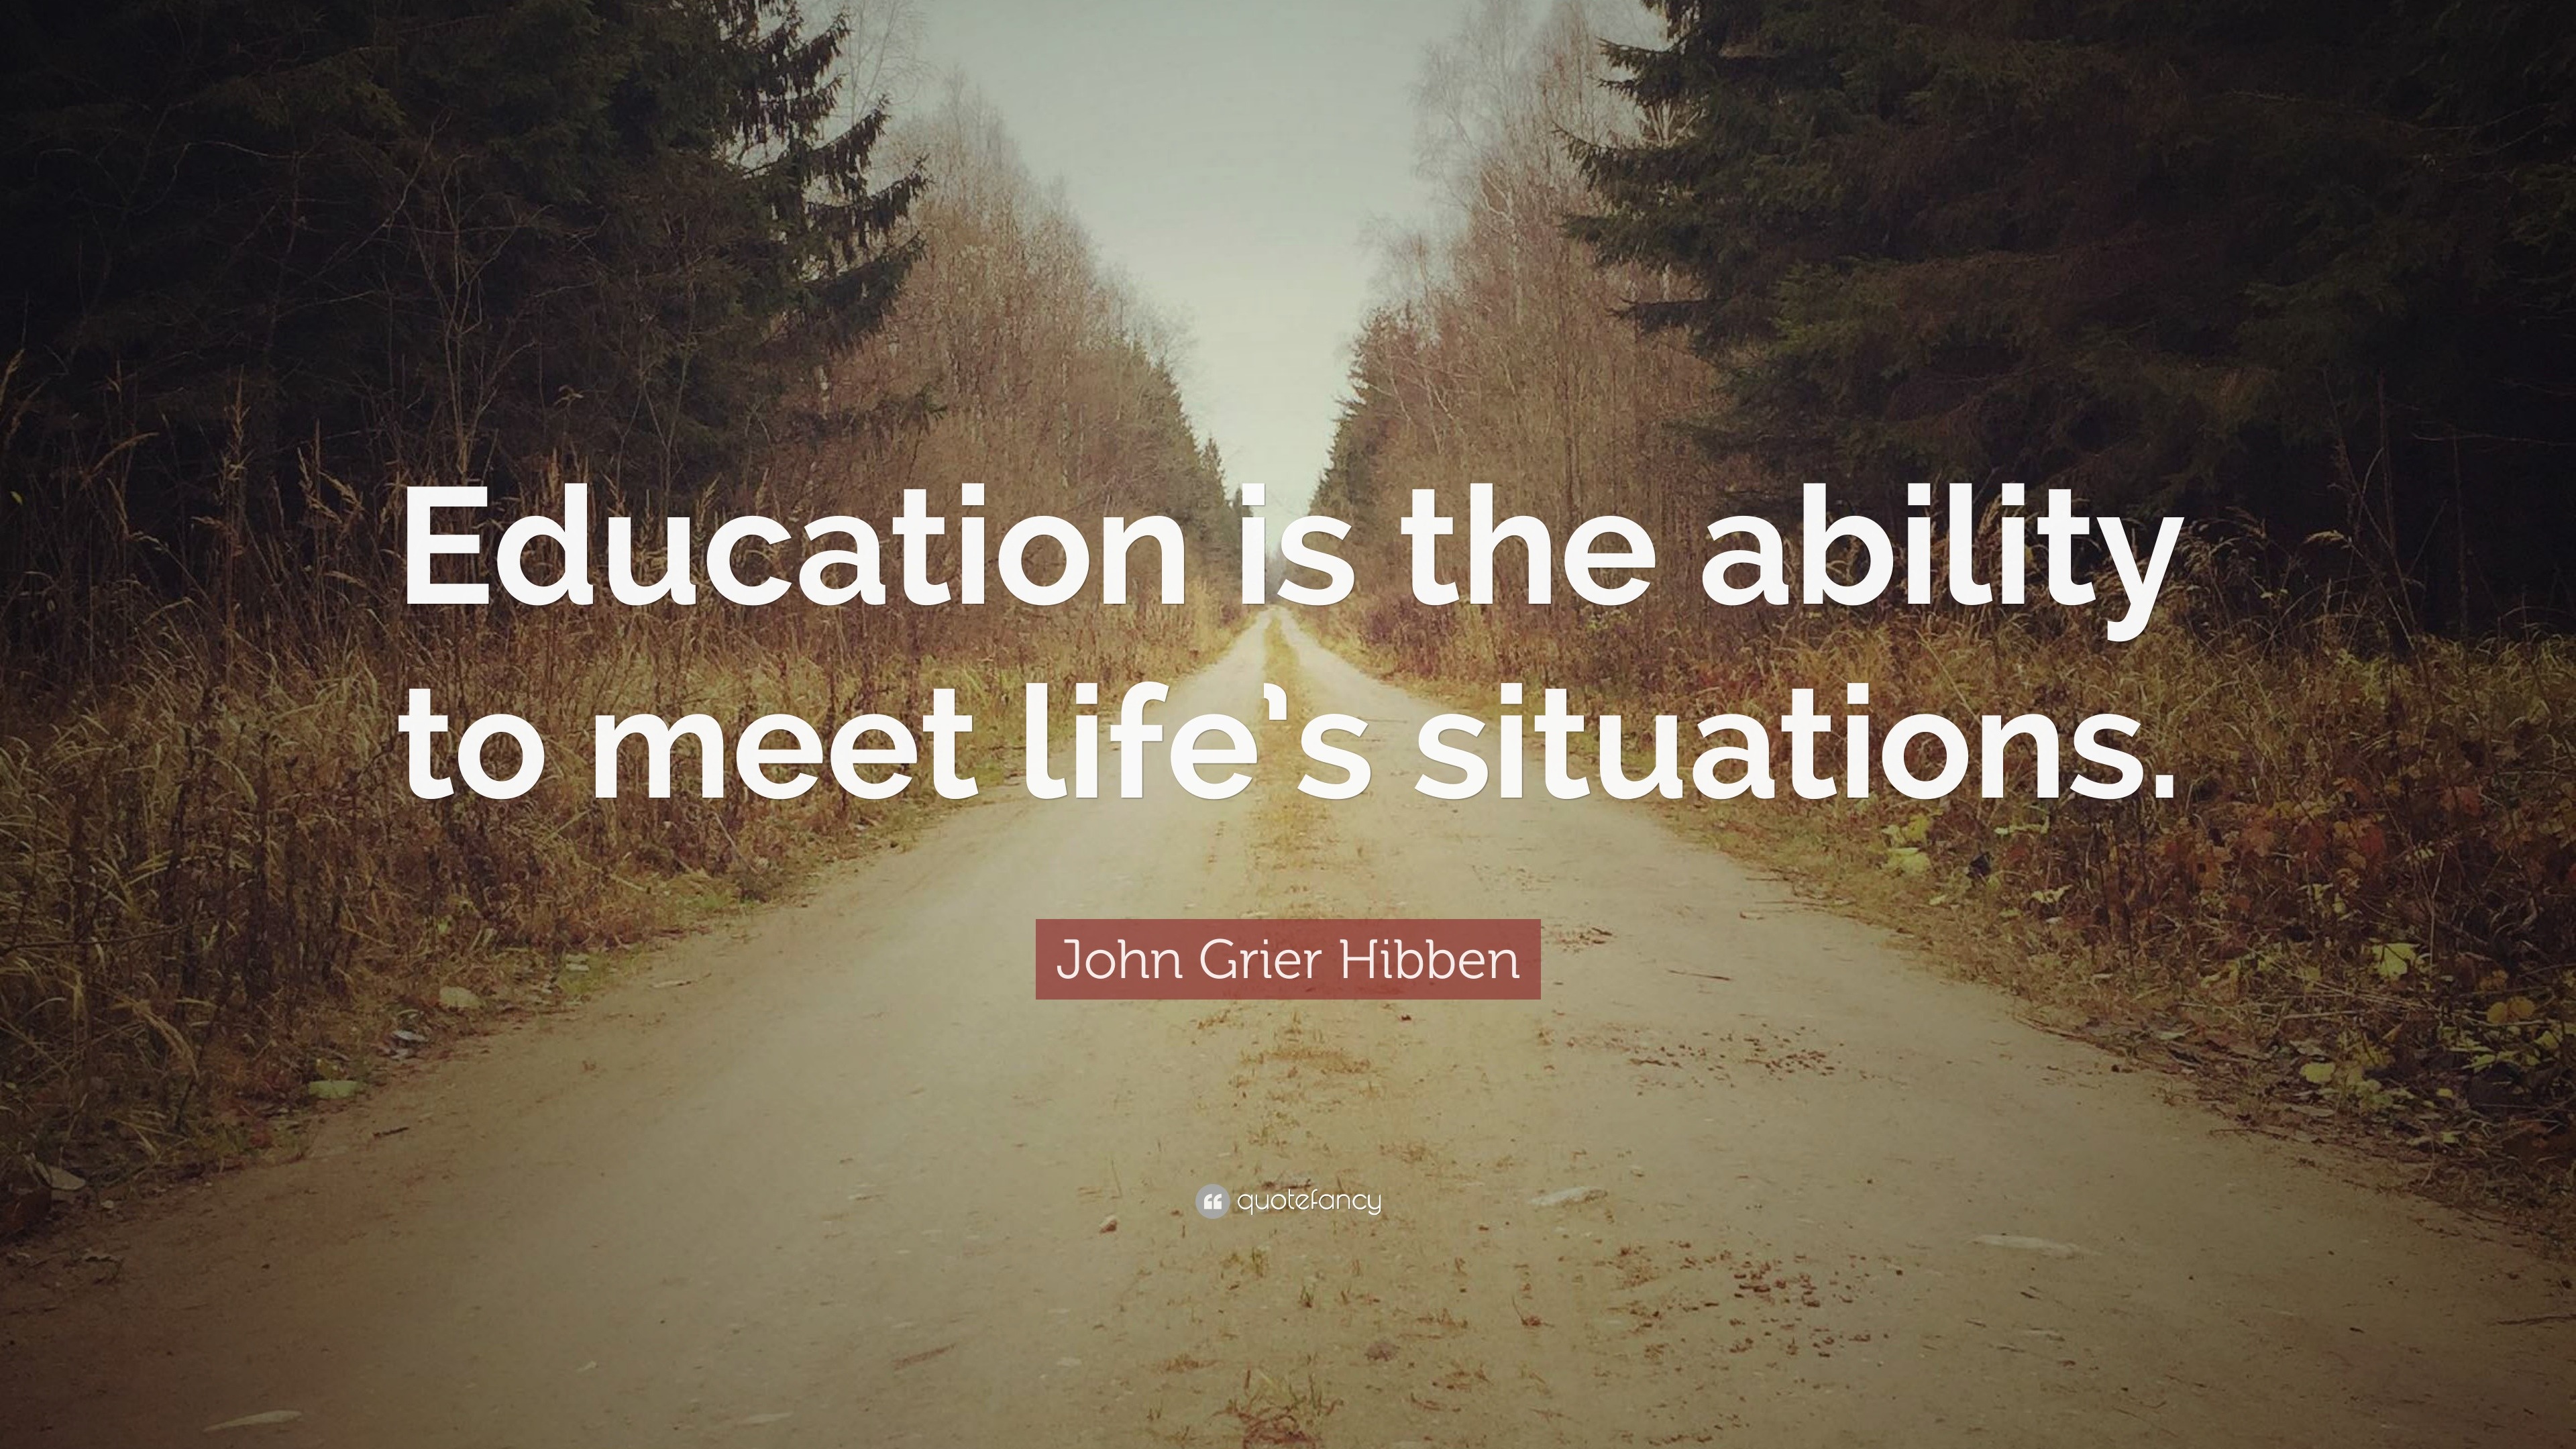 John Grier Hibben Quote: “Education is the ability to meet life’s ...